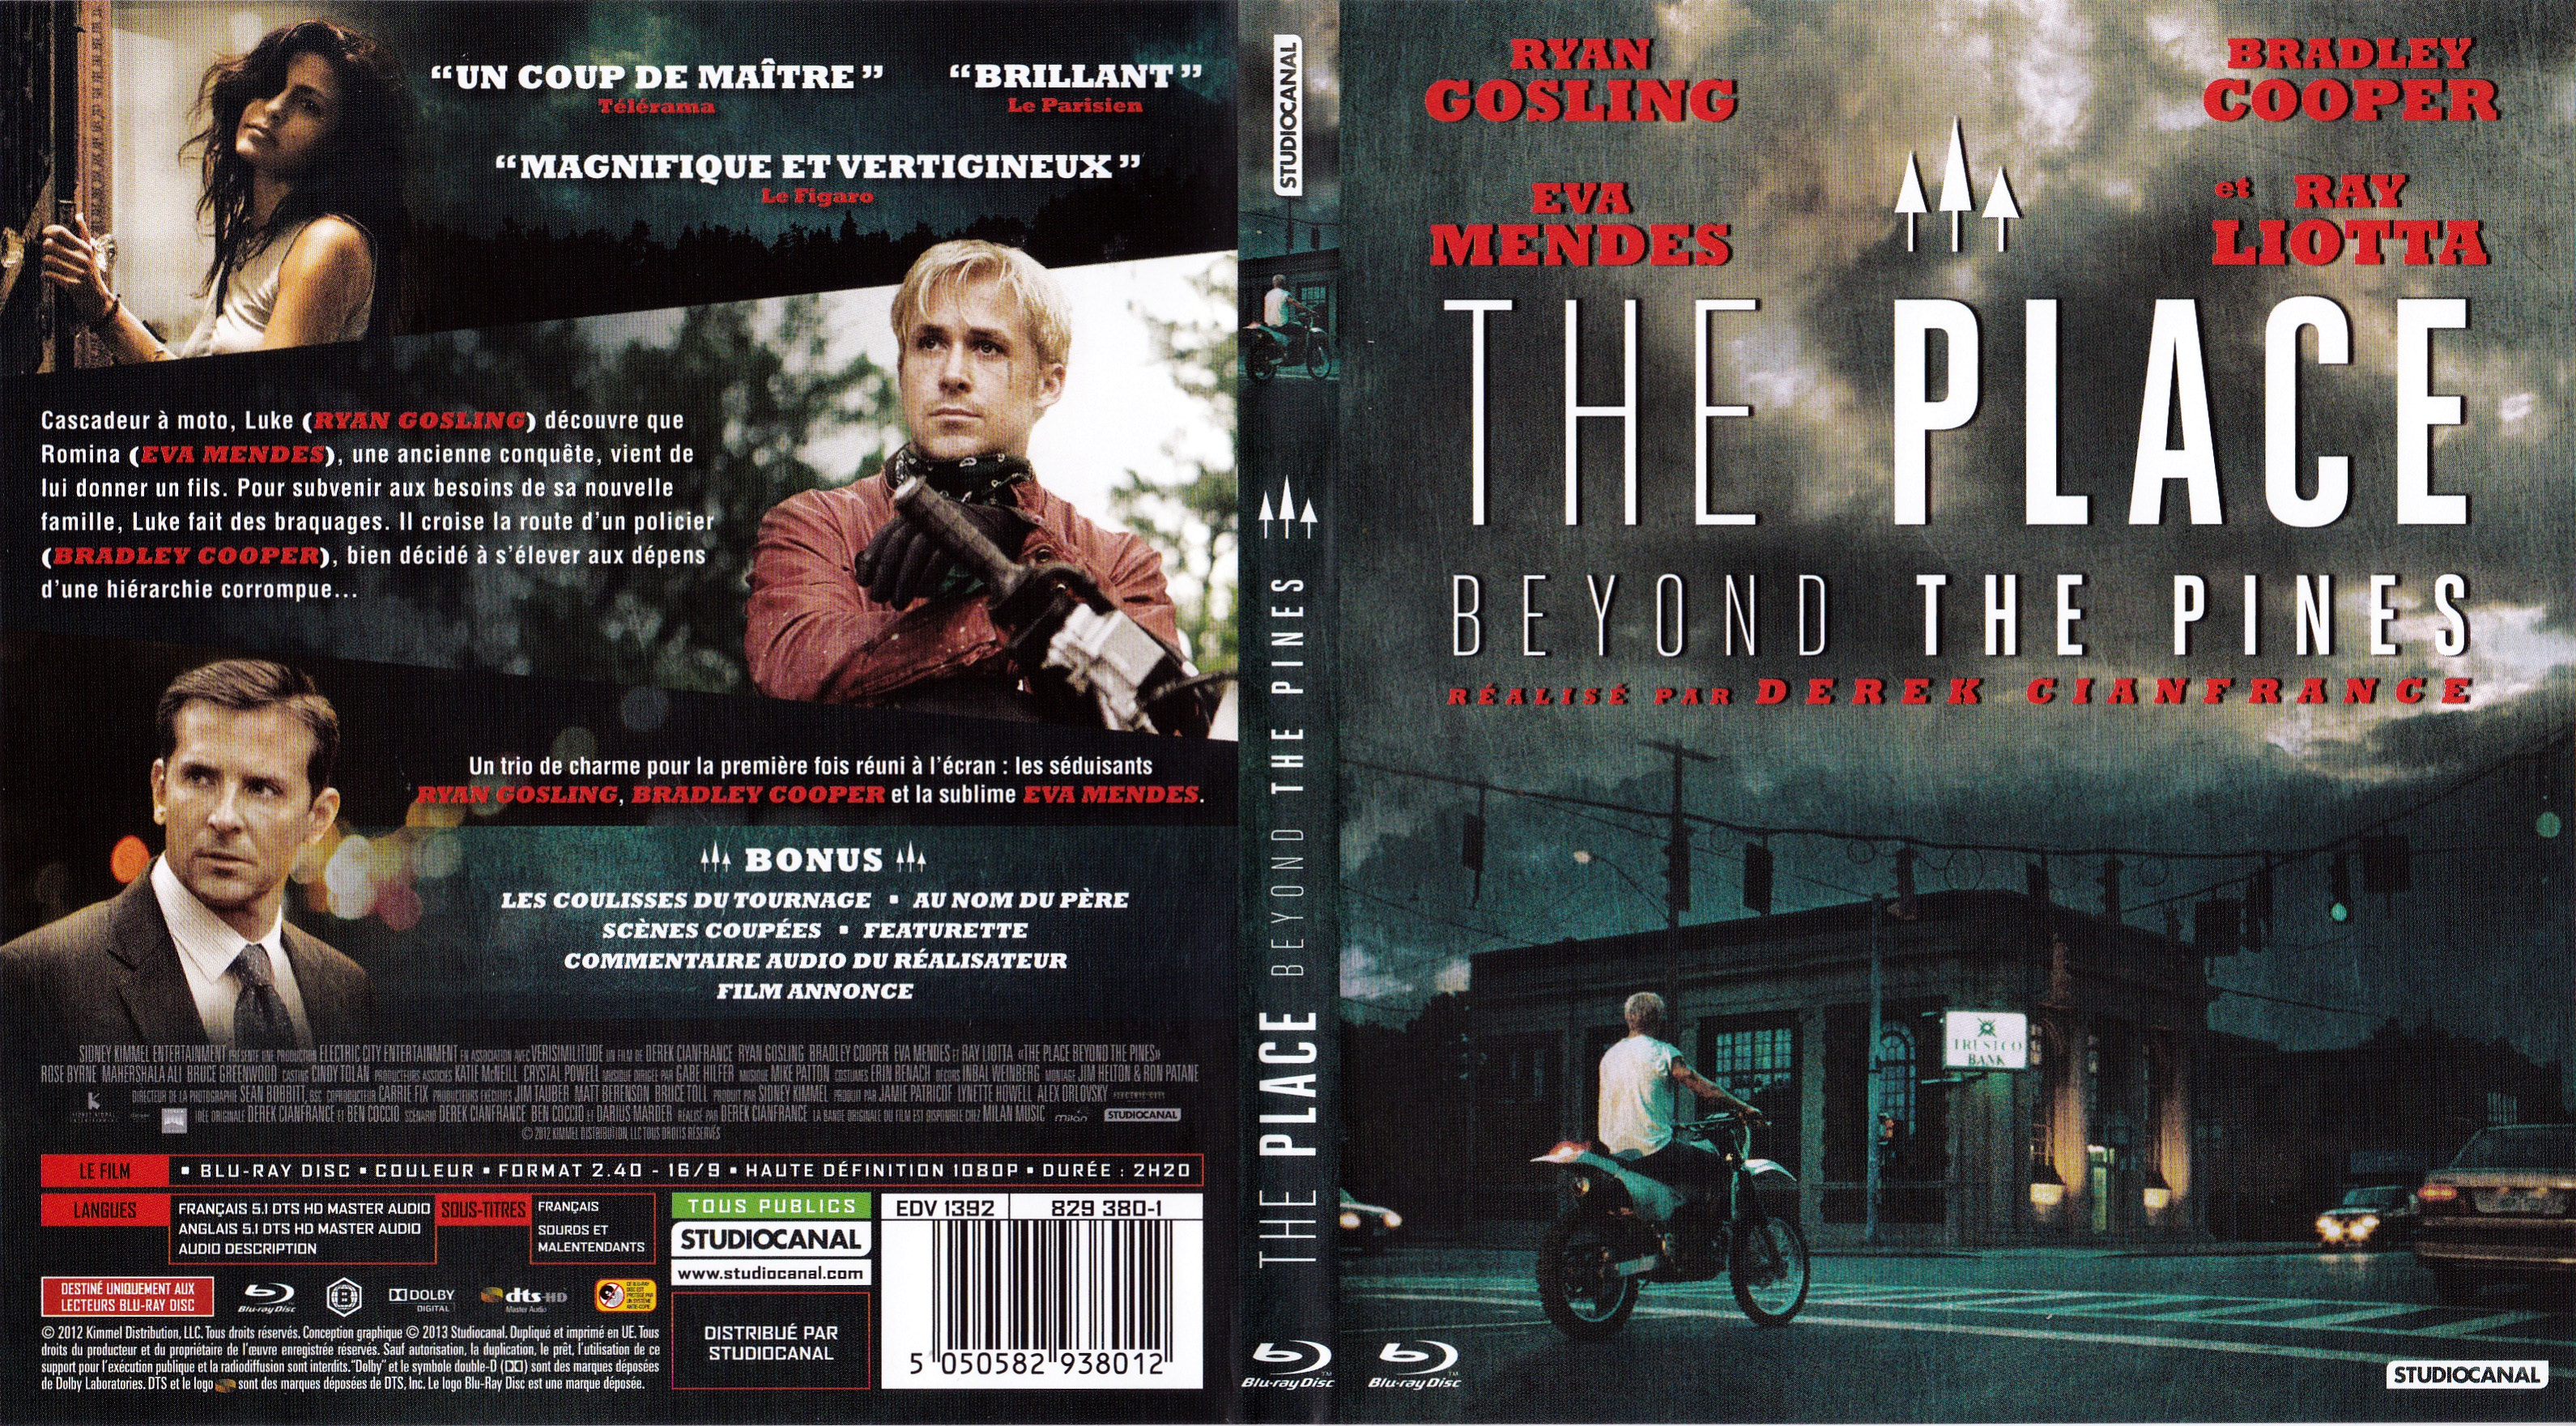 Jaquette DVD The place beyond the pines (BLU-RAY) v2